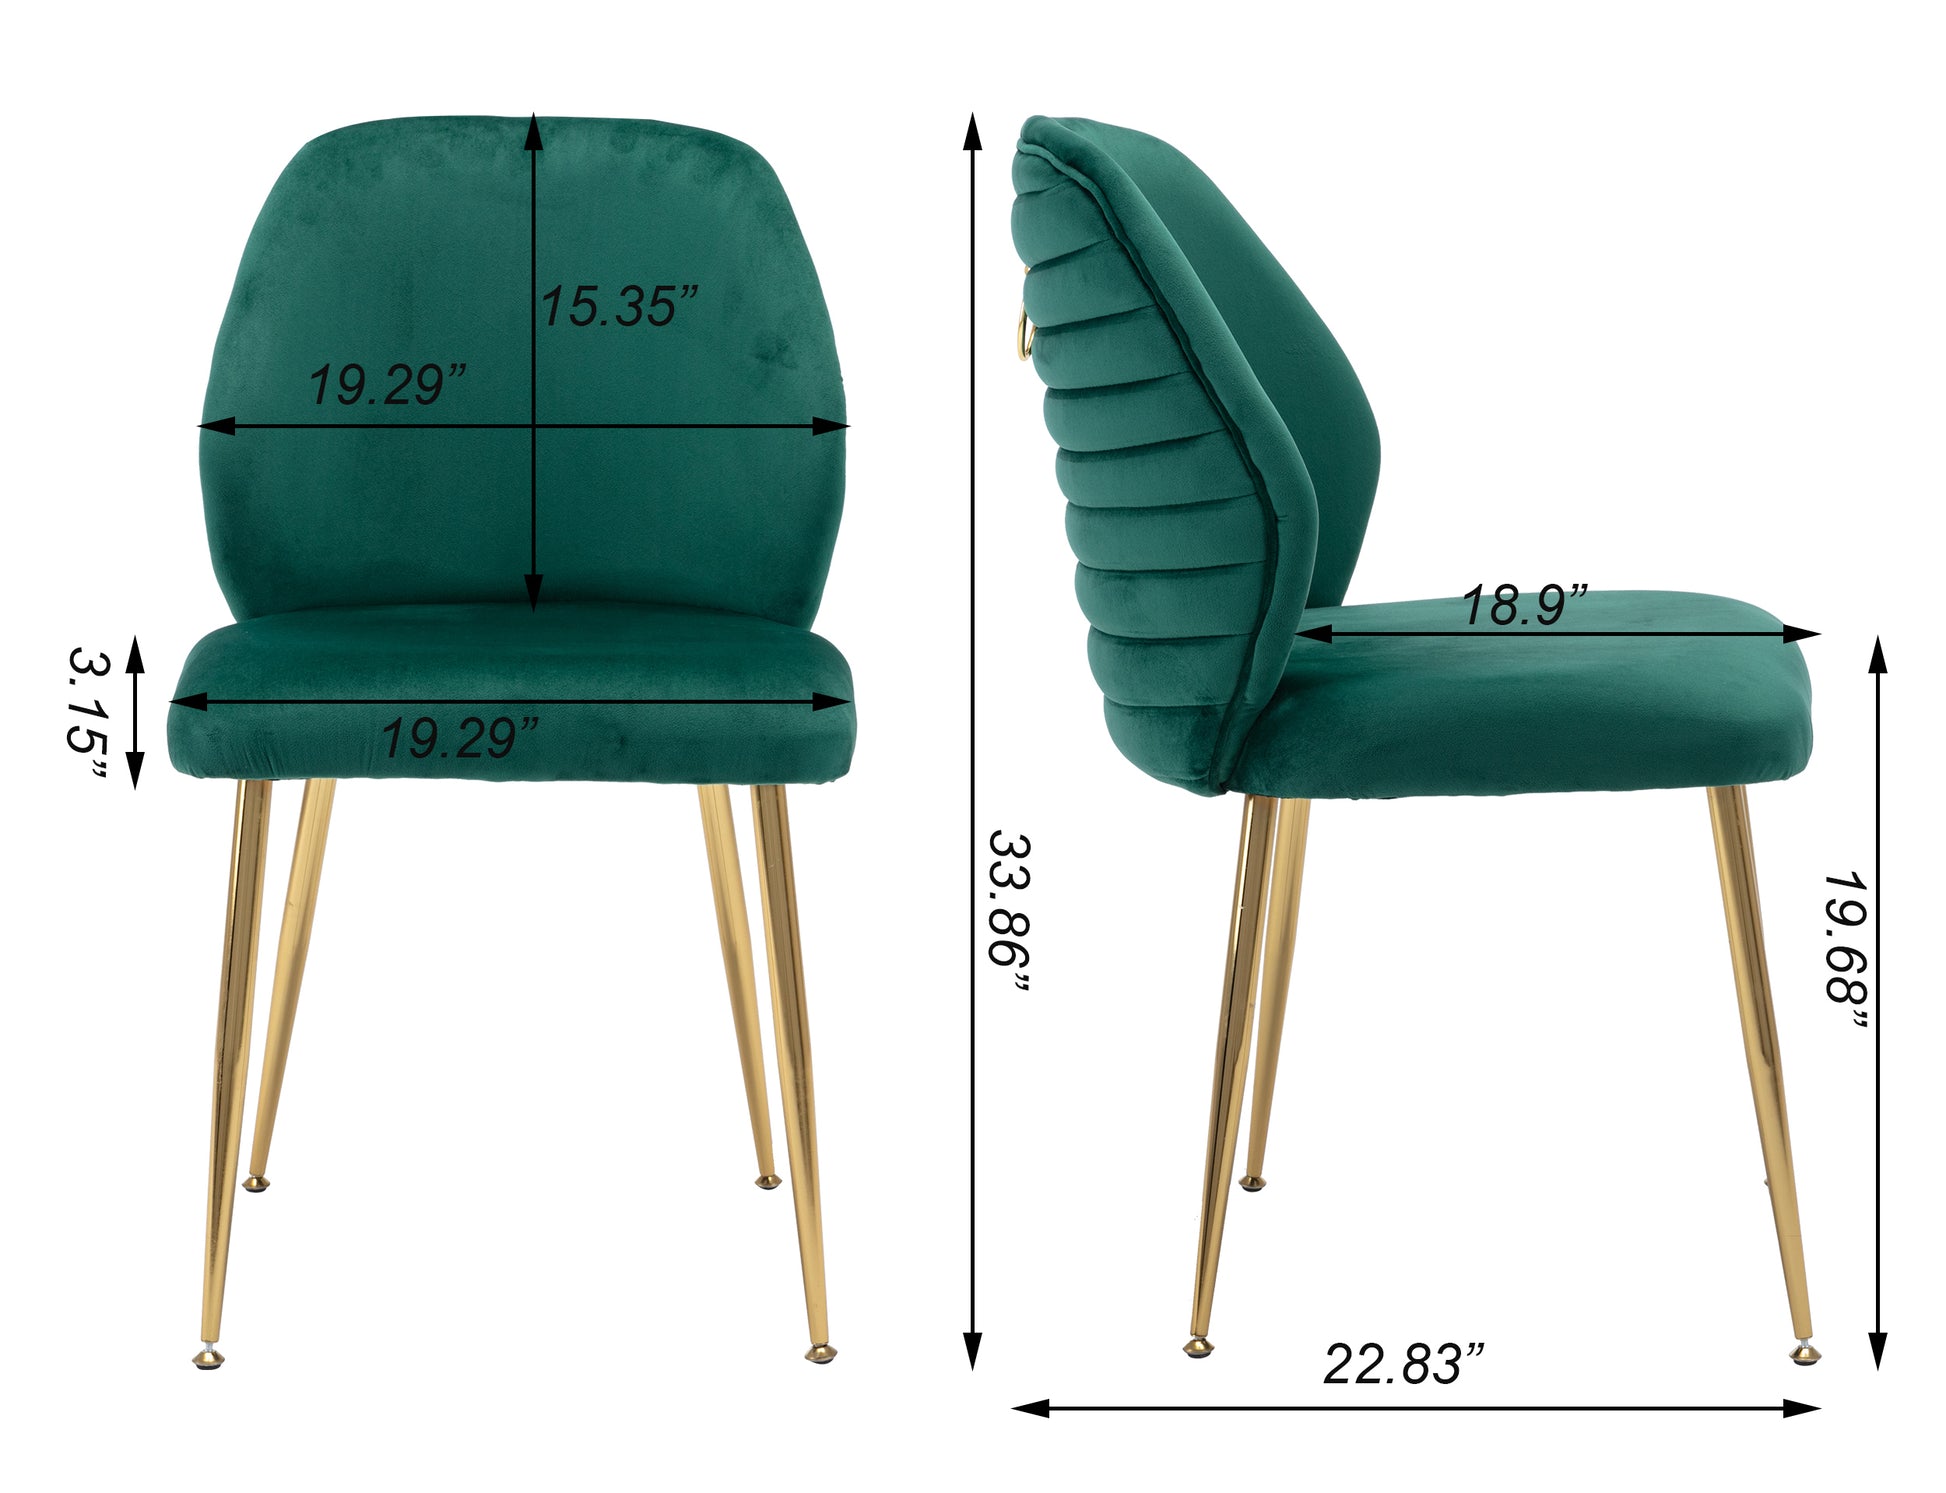 Modern Dining Chair Set of 2, Woven Velvet Upholstered Side Chairs with Barrel Backrest and Gold Metal Legs, Accent Chairs for Living Room Bedroom,Green - Enova Luxe Home Store